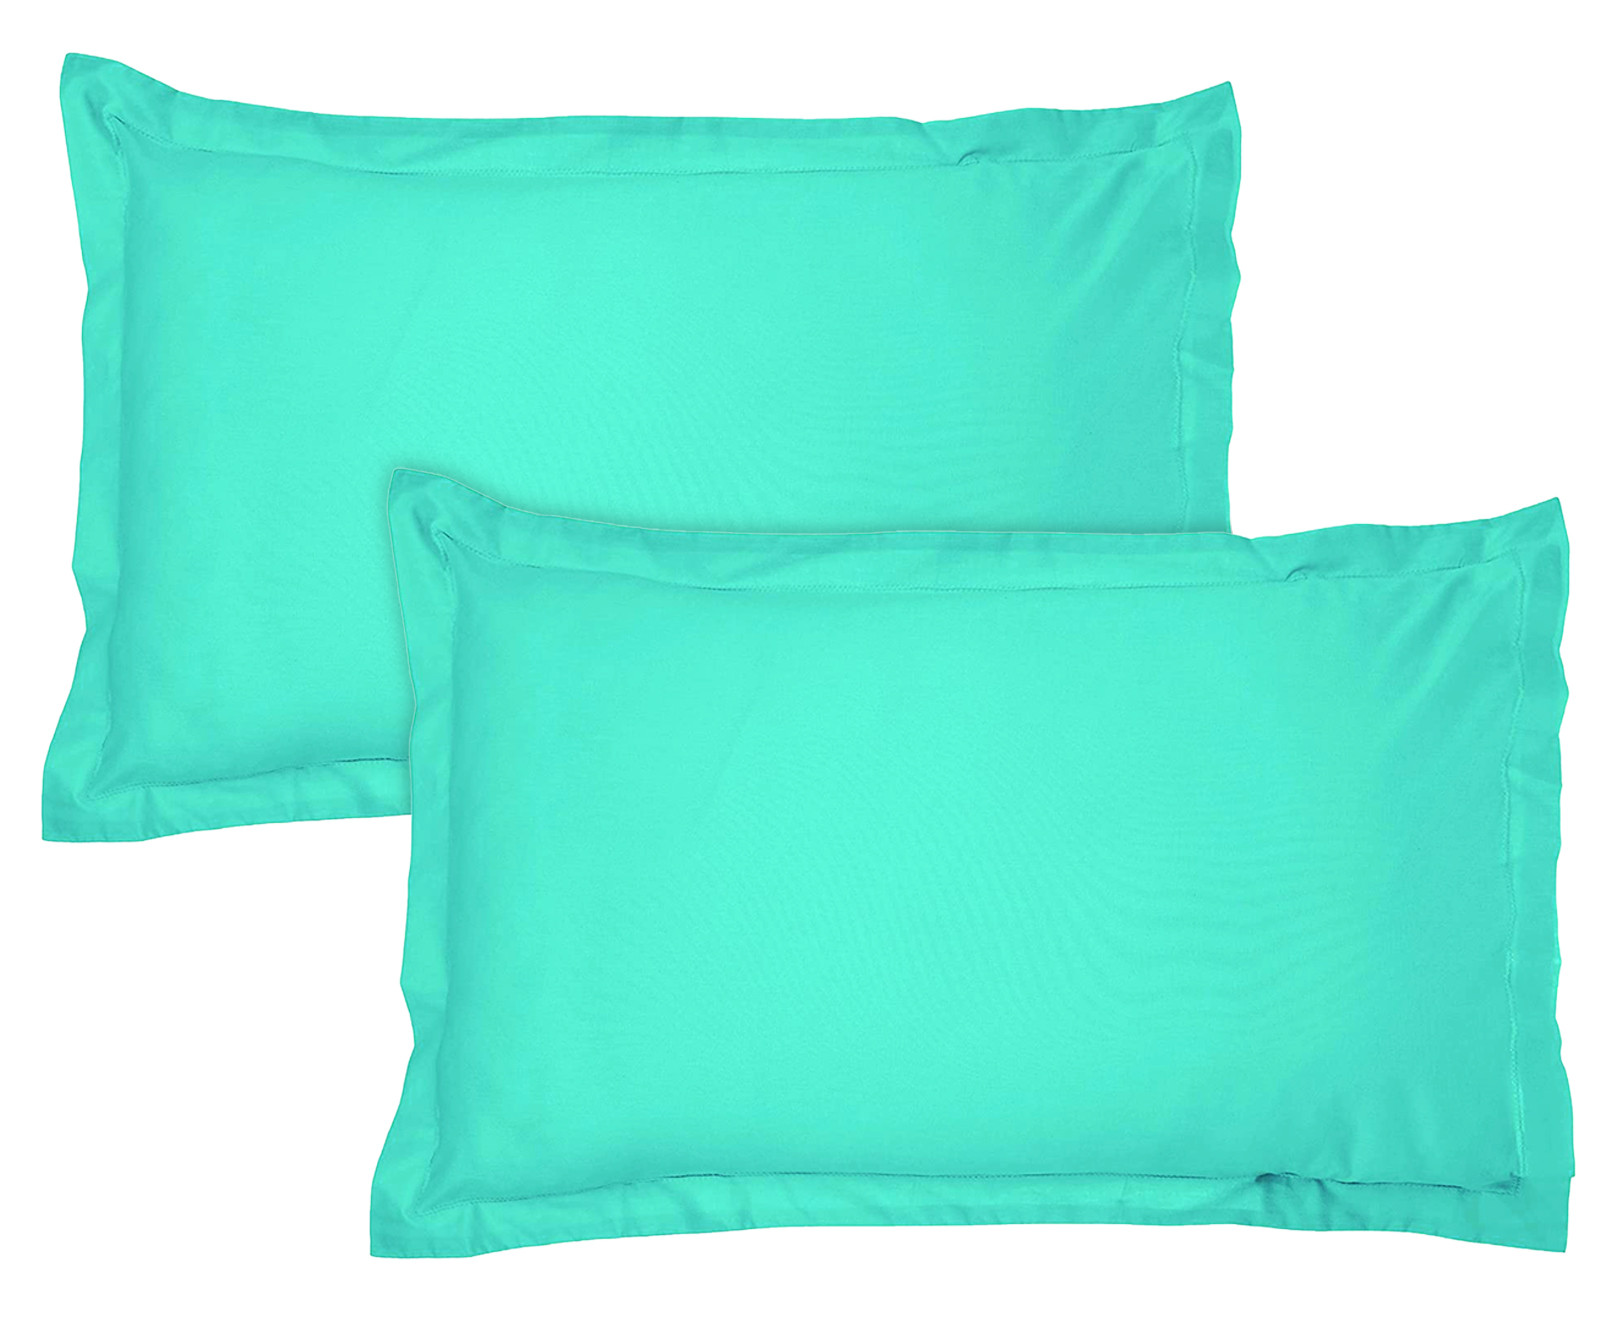 Kuber Industries Breathable & Soft Cotton Pillow Cover For Sofa, Couch, Bed - 29x20 Inch,(Green)